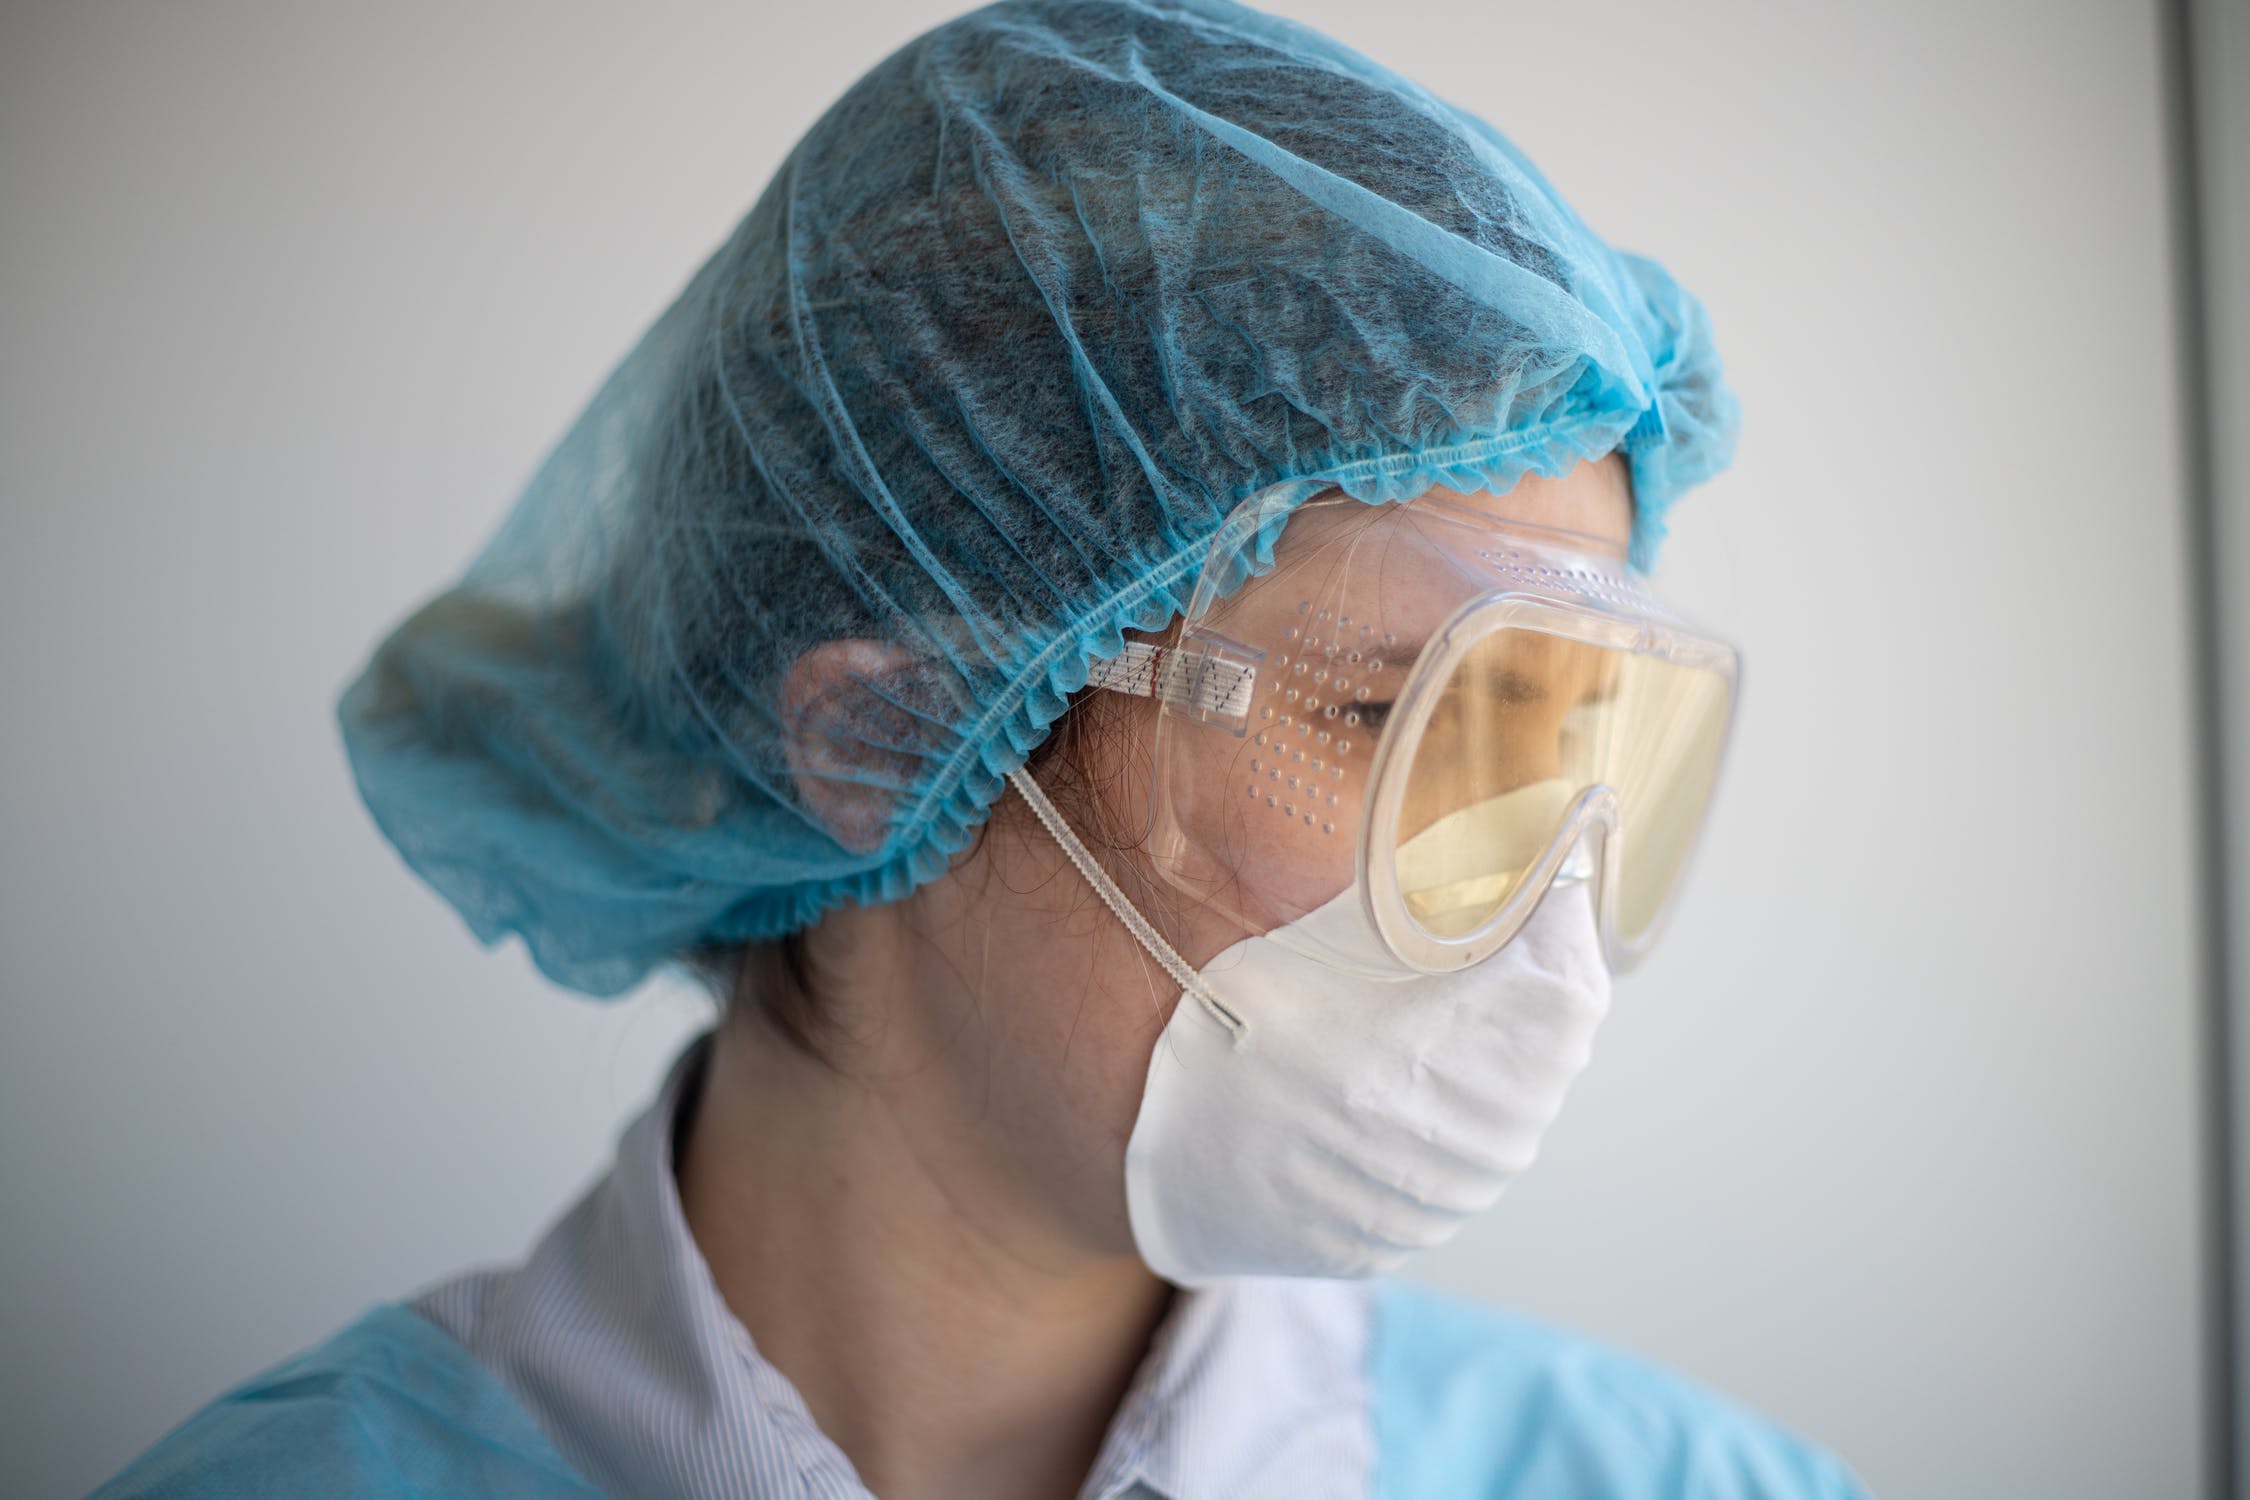 Surgical Face Mask Market: Rise in Focus on Production of Protective Equipment Including Face Masks to Boost the Growth of the Market